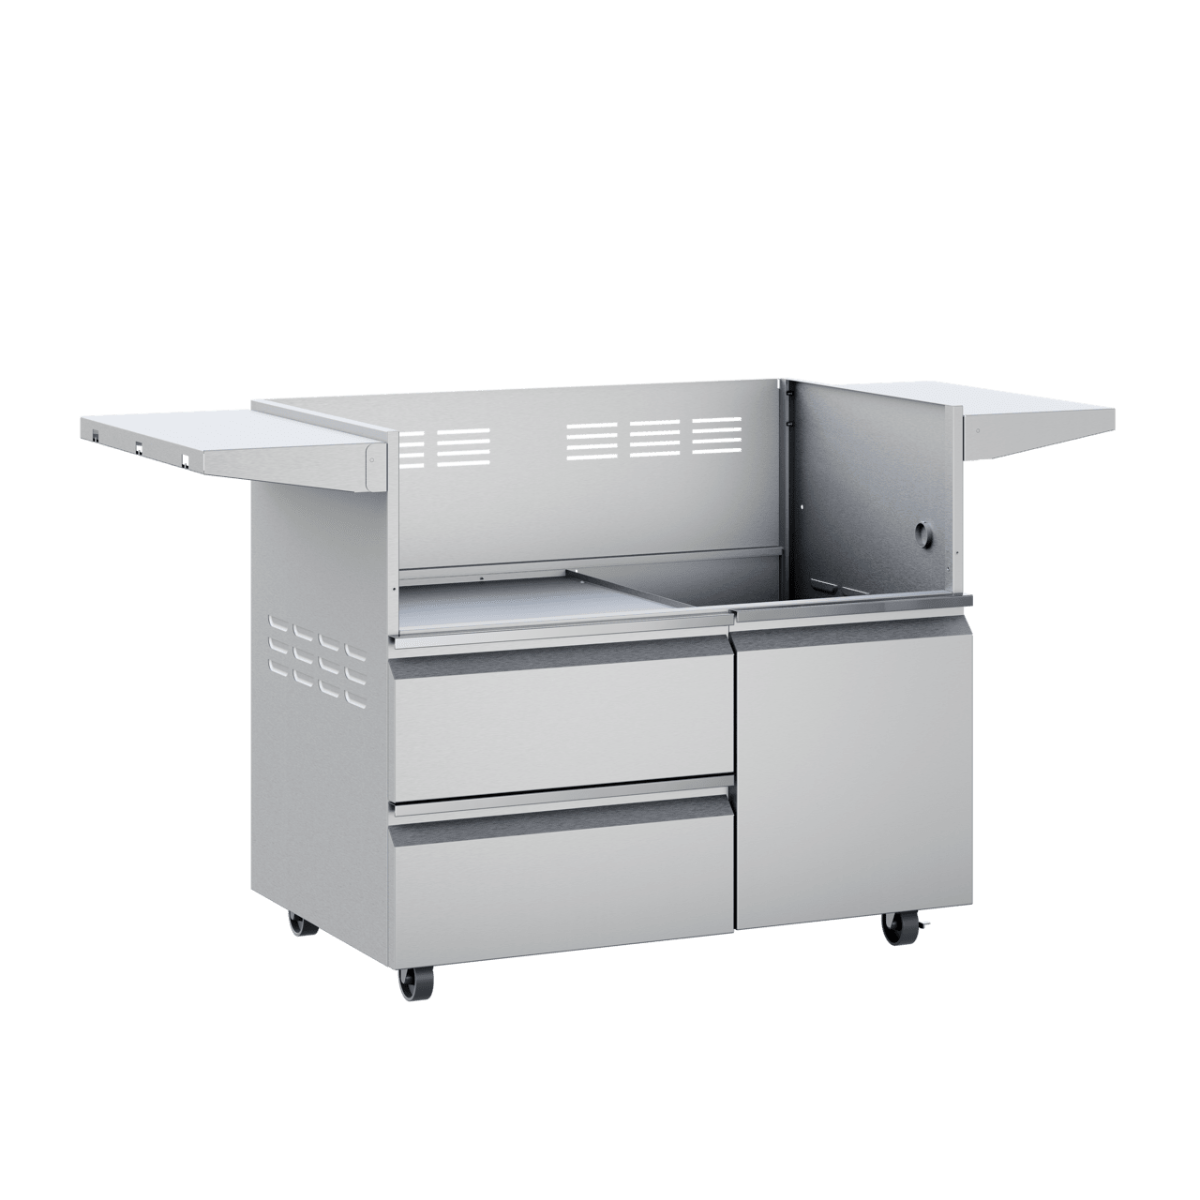 Angled front view of a 42-inch Twin Eagles grill base with side shelves extended. The stainless steel base includes storage compartments, featuring two drawers on the left and a single door on the right. The interior is spacious, designed to hold a grill or smoker.